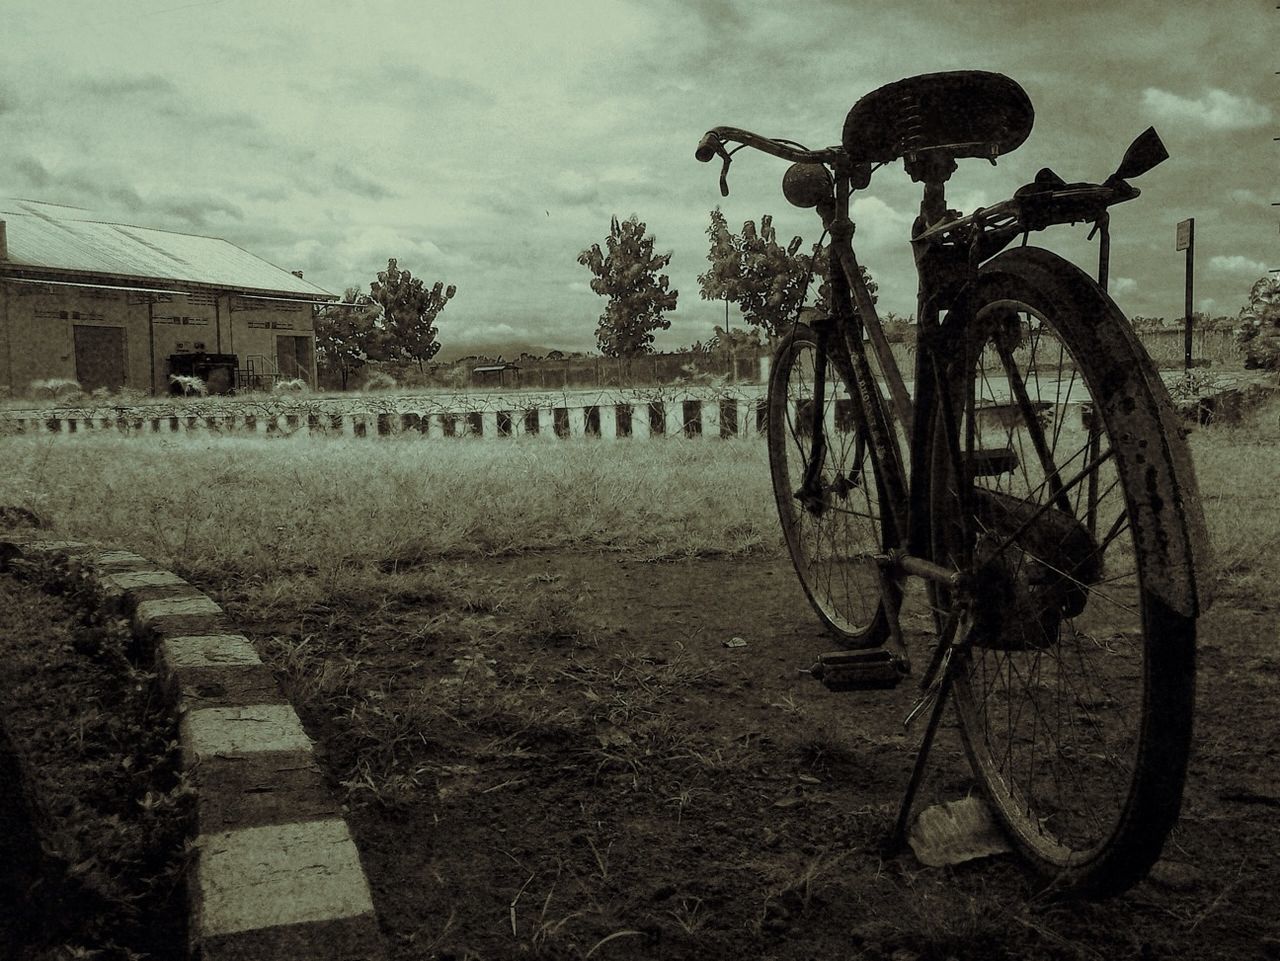 Rear view of a bicycle parked on landscape